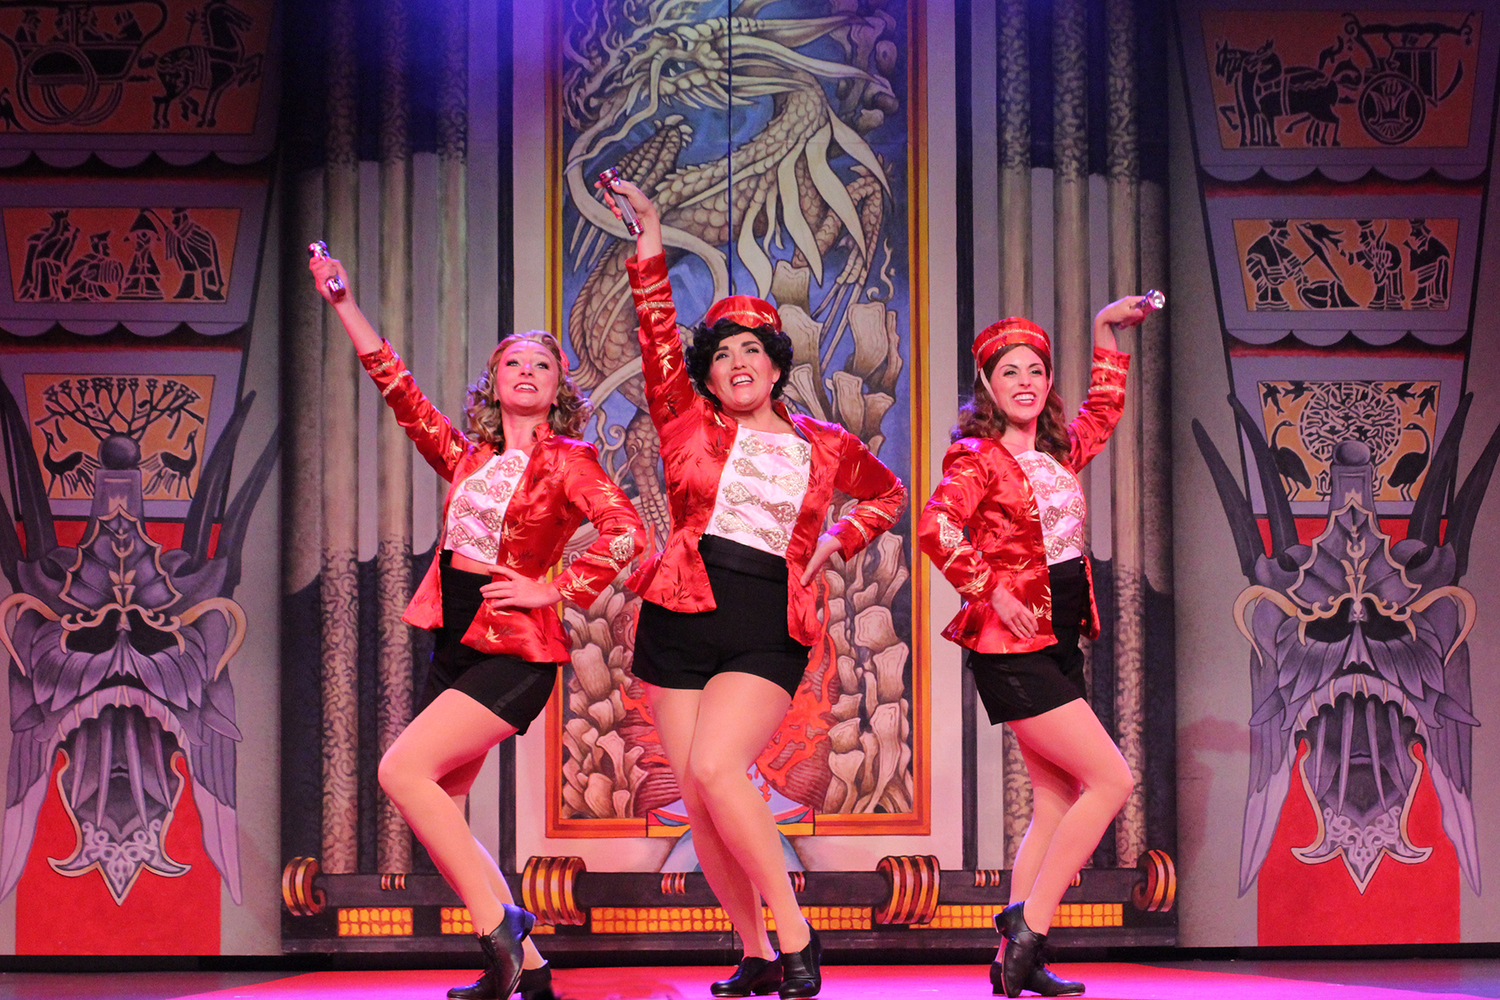 Review: LET'S GO TO THE MOVIES at Broadway Palm is Creative and Comical! 